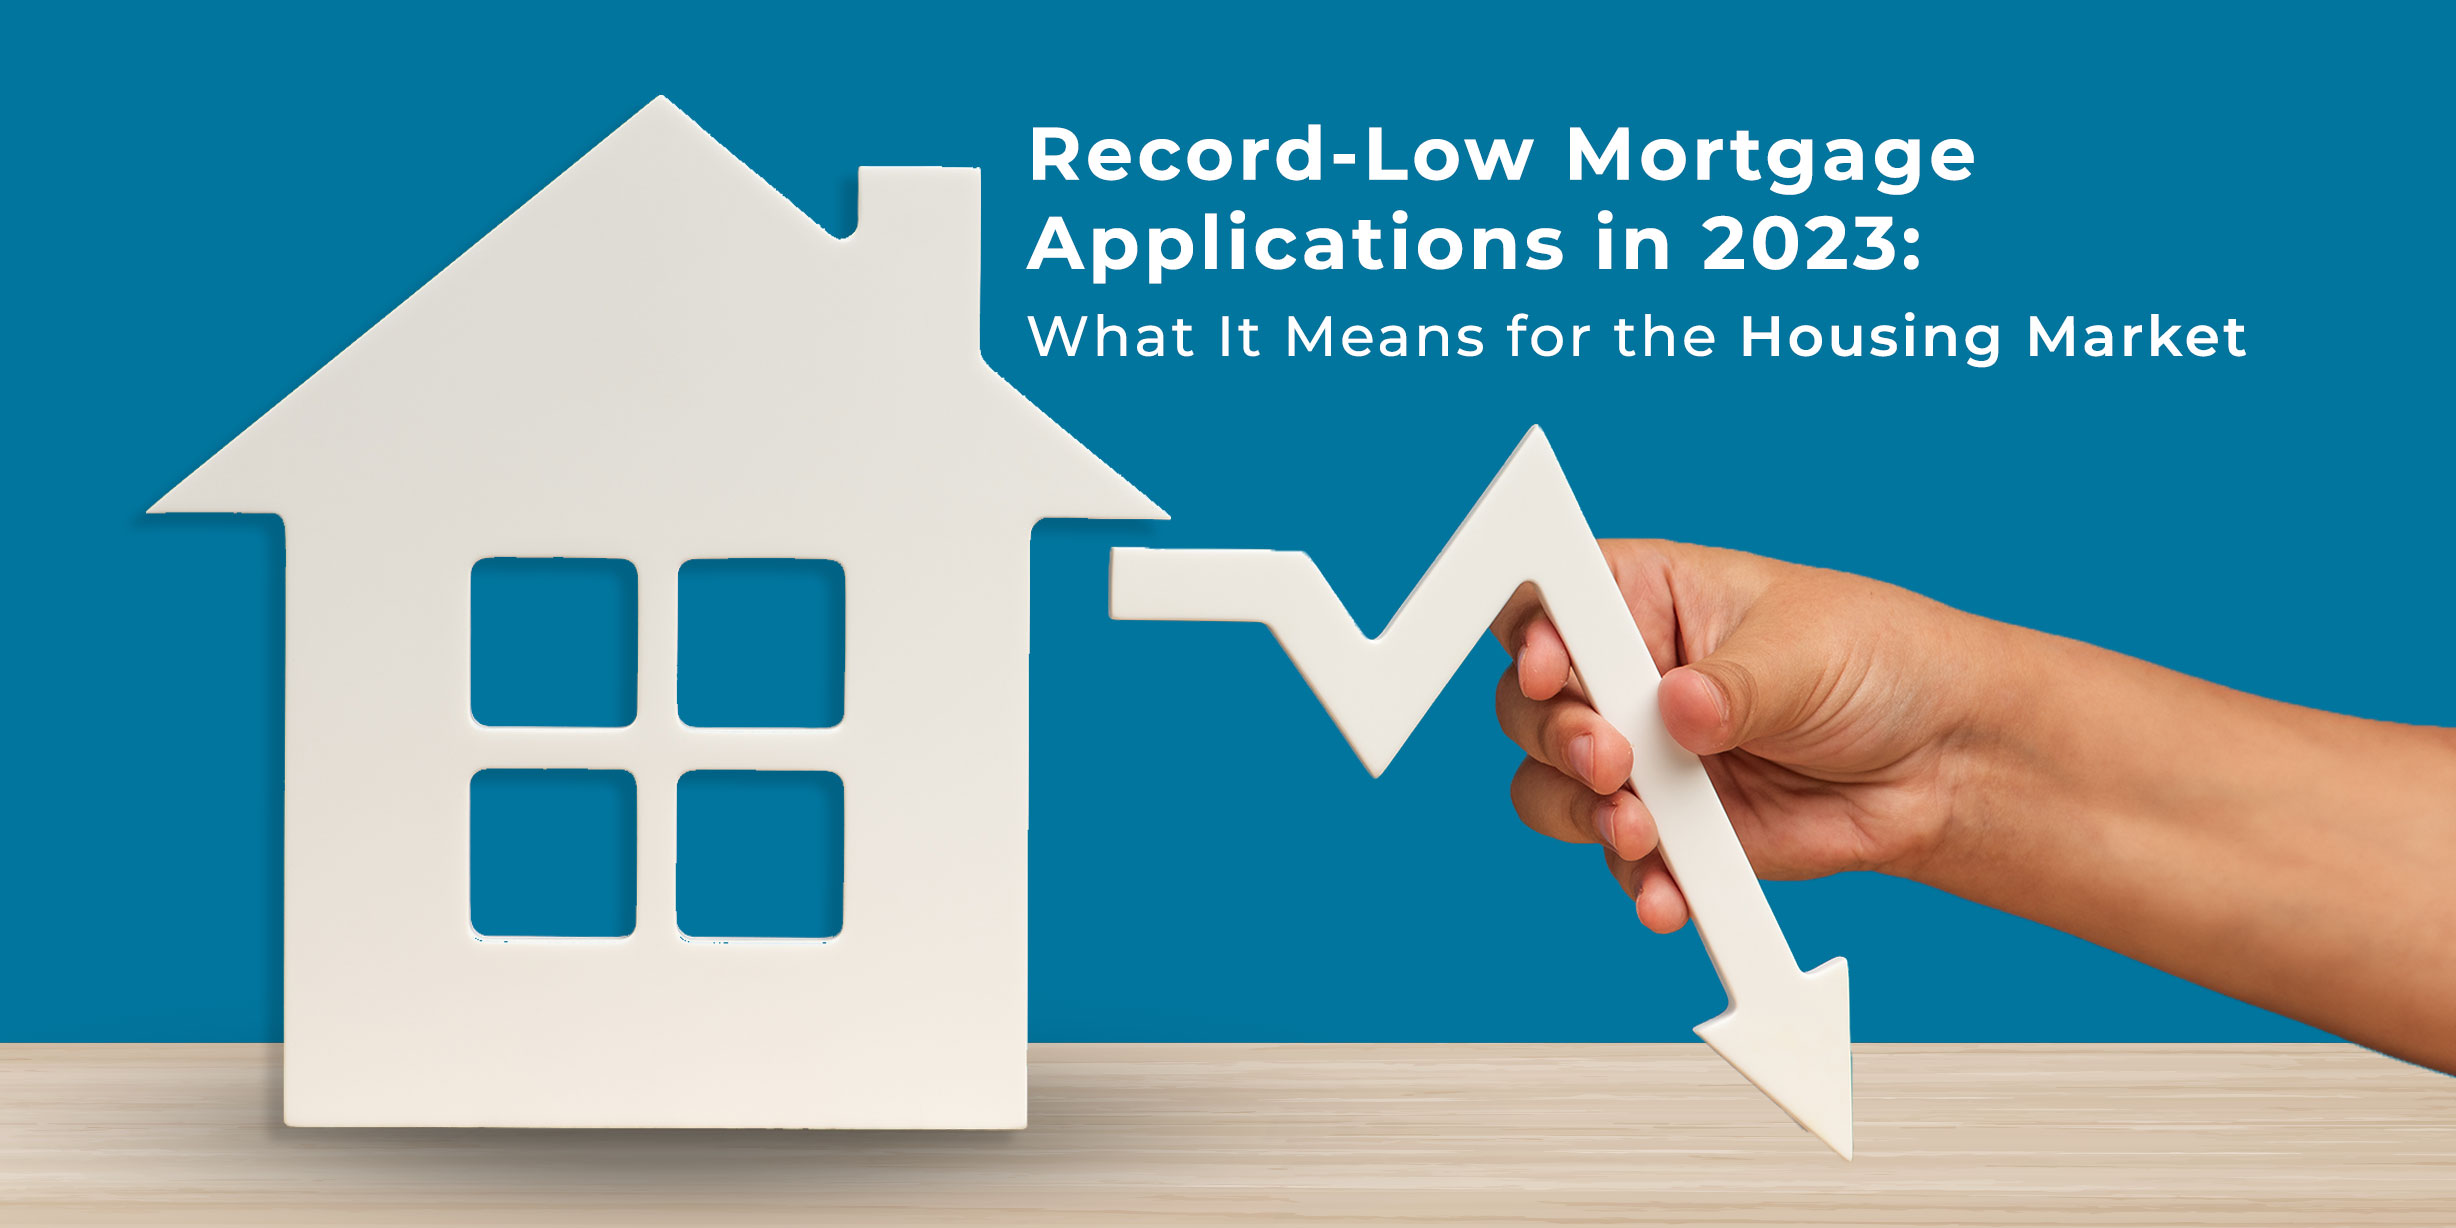 Record-low Mortgage Applications in 2023: What It Means for the Housing Market